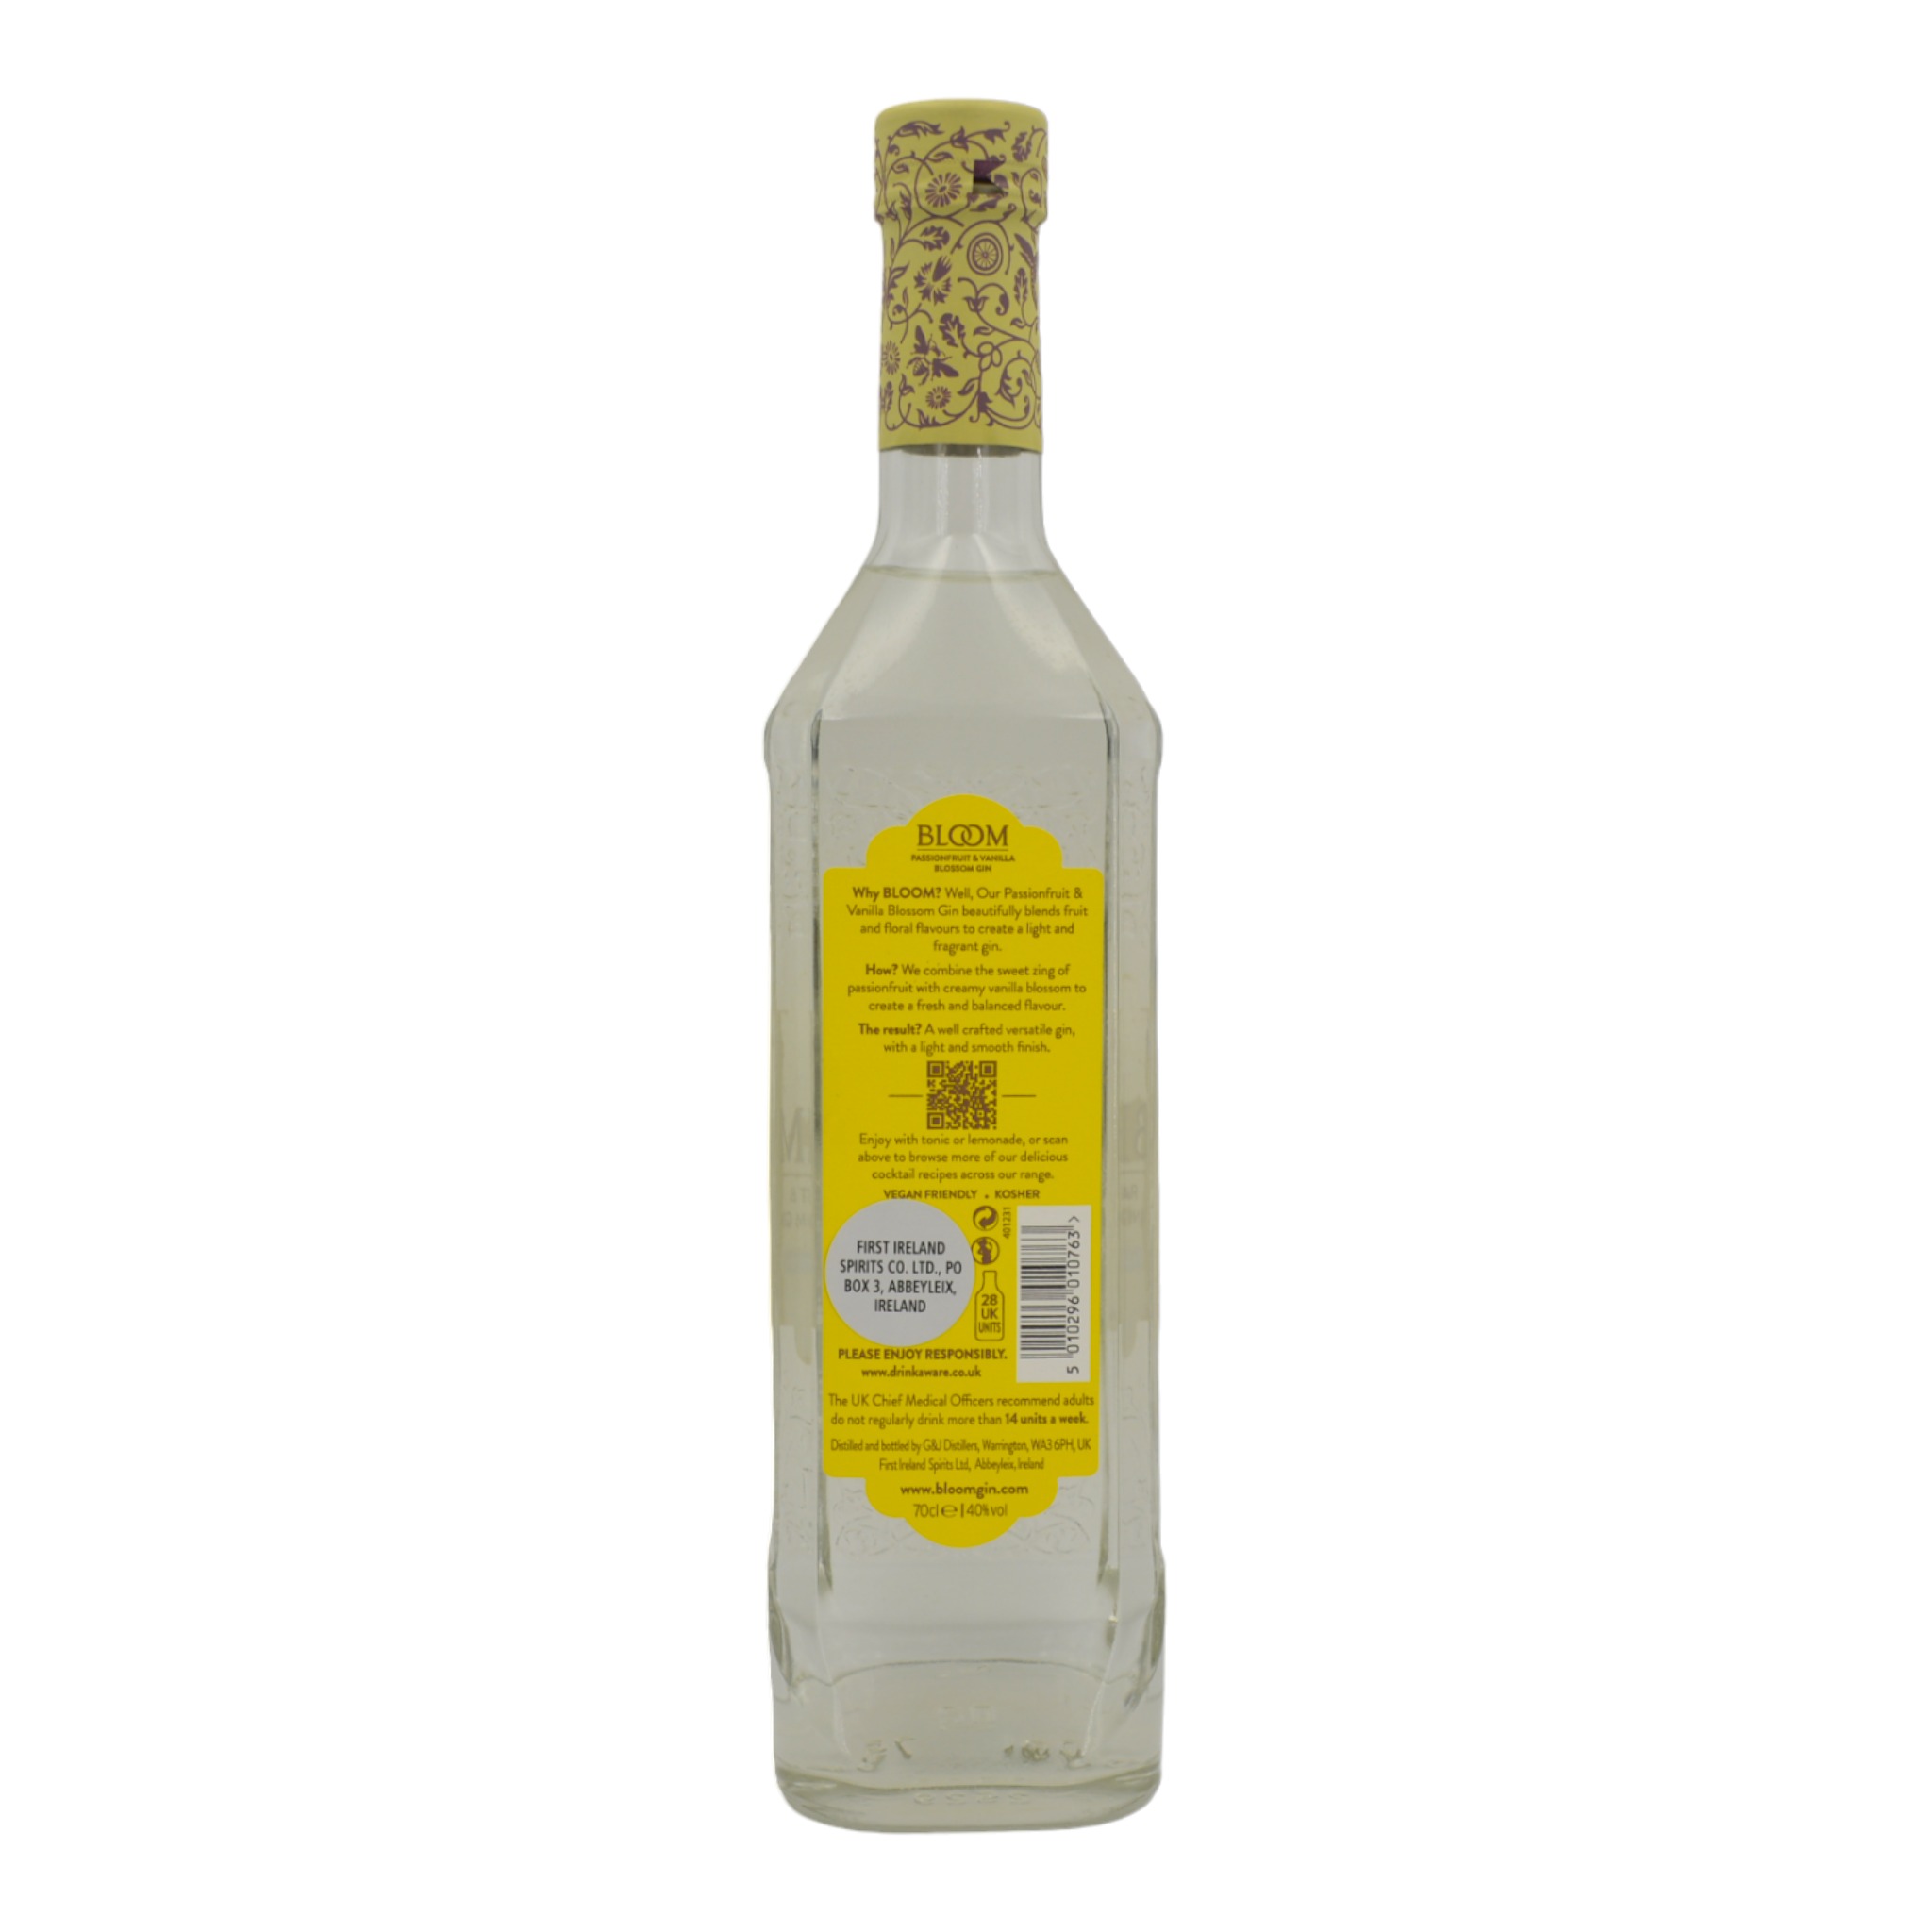 5010296010763Bloom Passionfruit and Vanilla Blossom Gin Limited Edition s1 - Weinhaus-Buecker